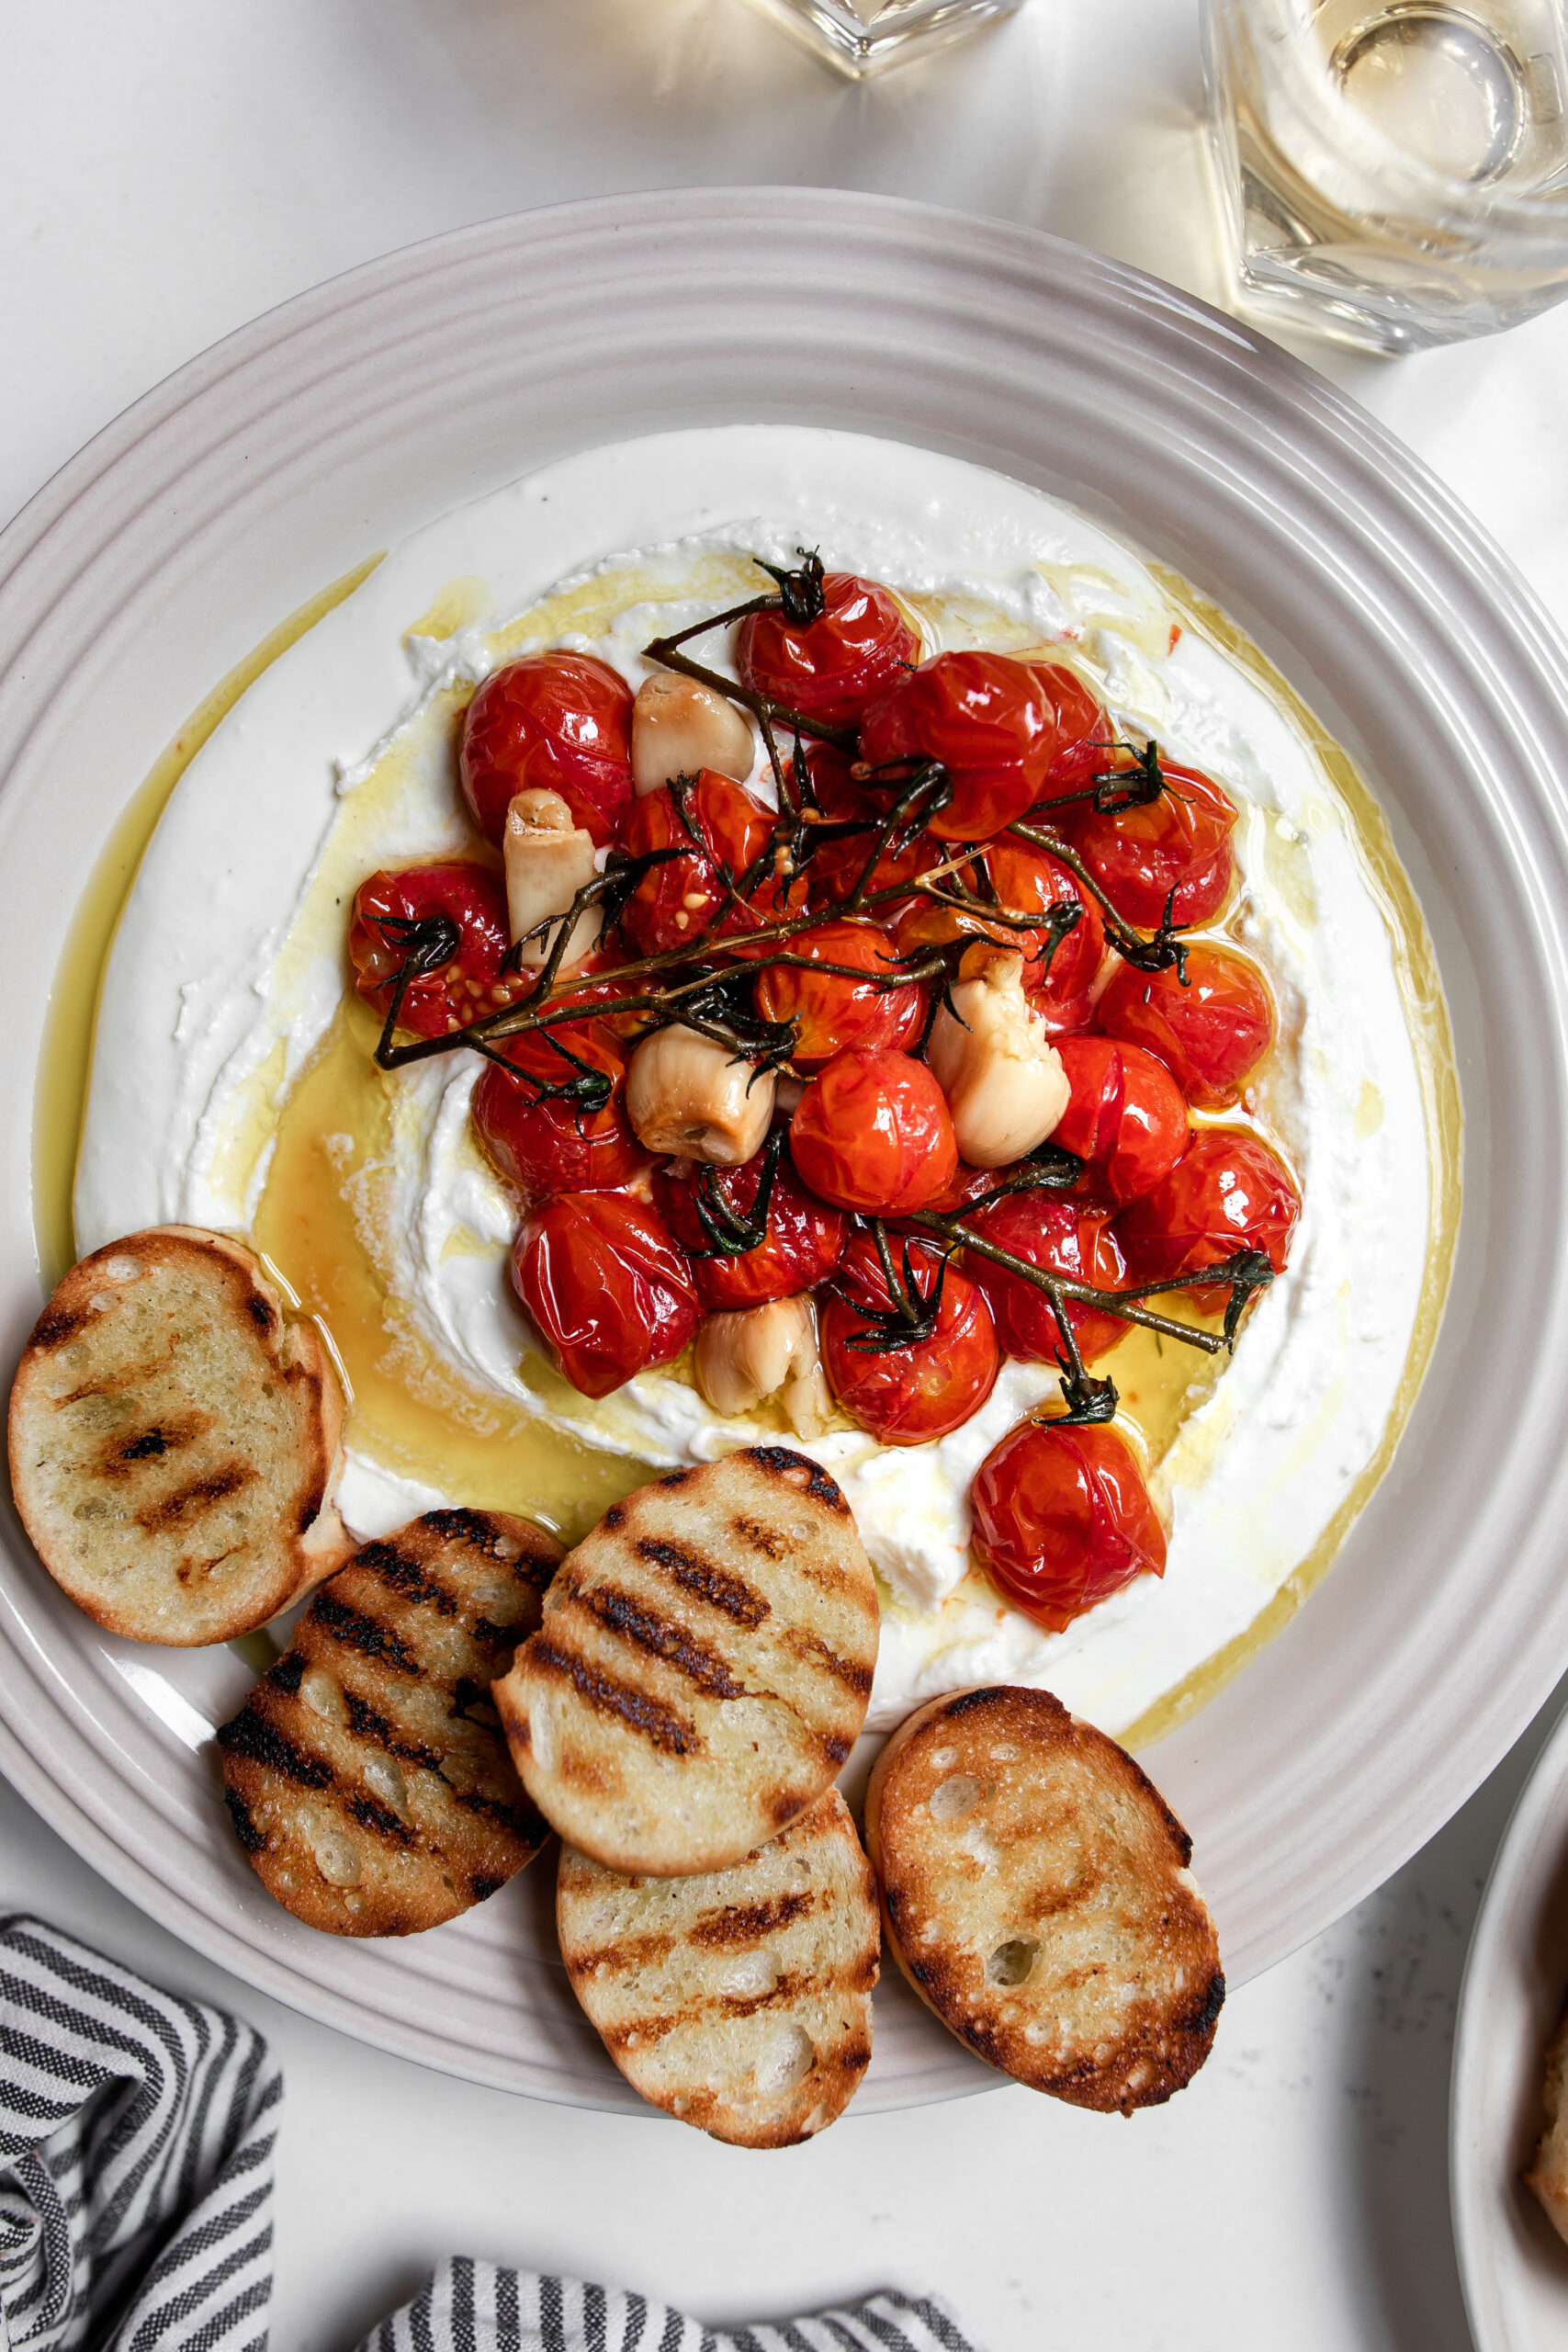 Confit tomatoes on whipped cheese with grilled baguette on a plate.